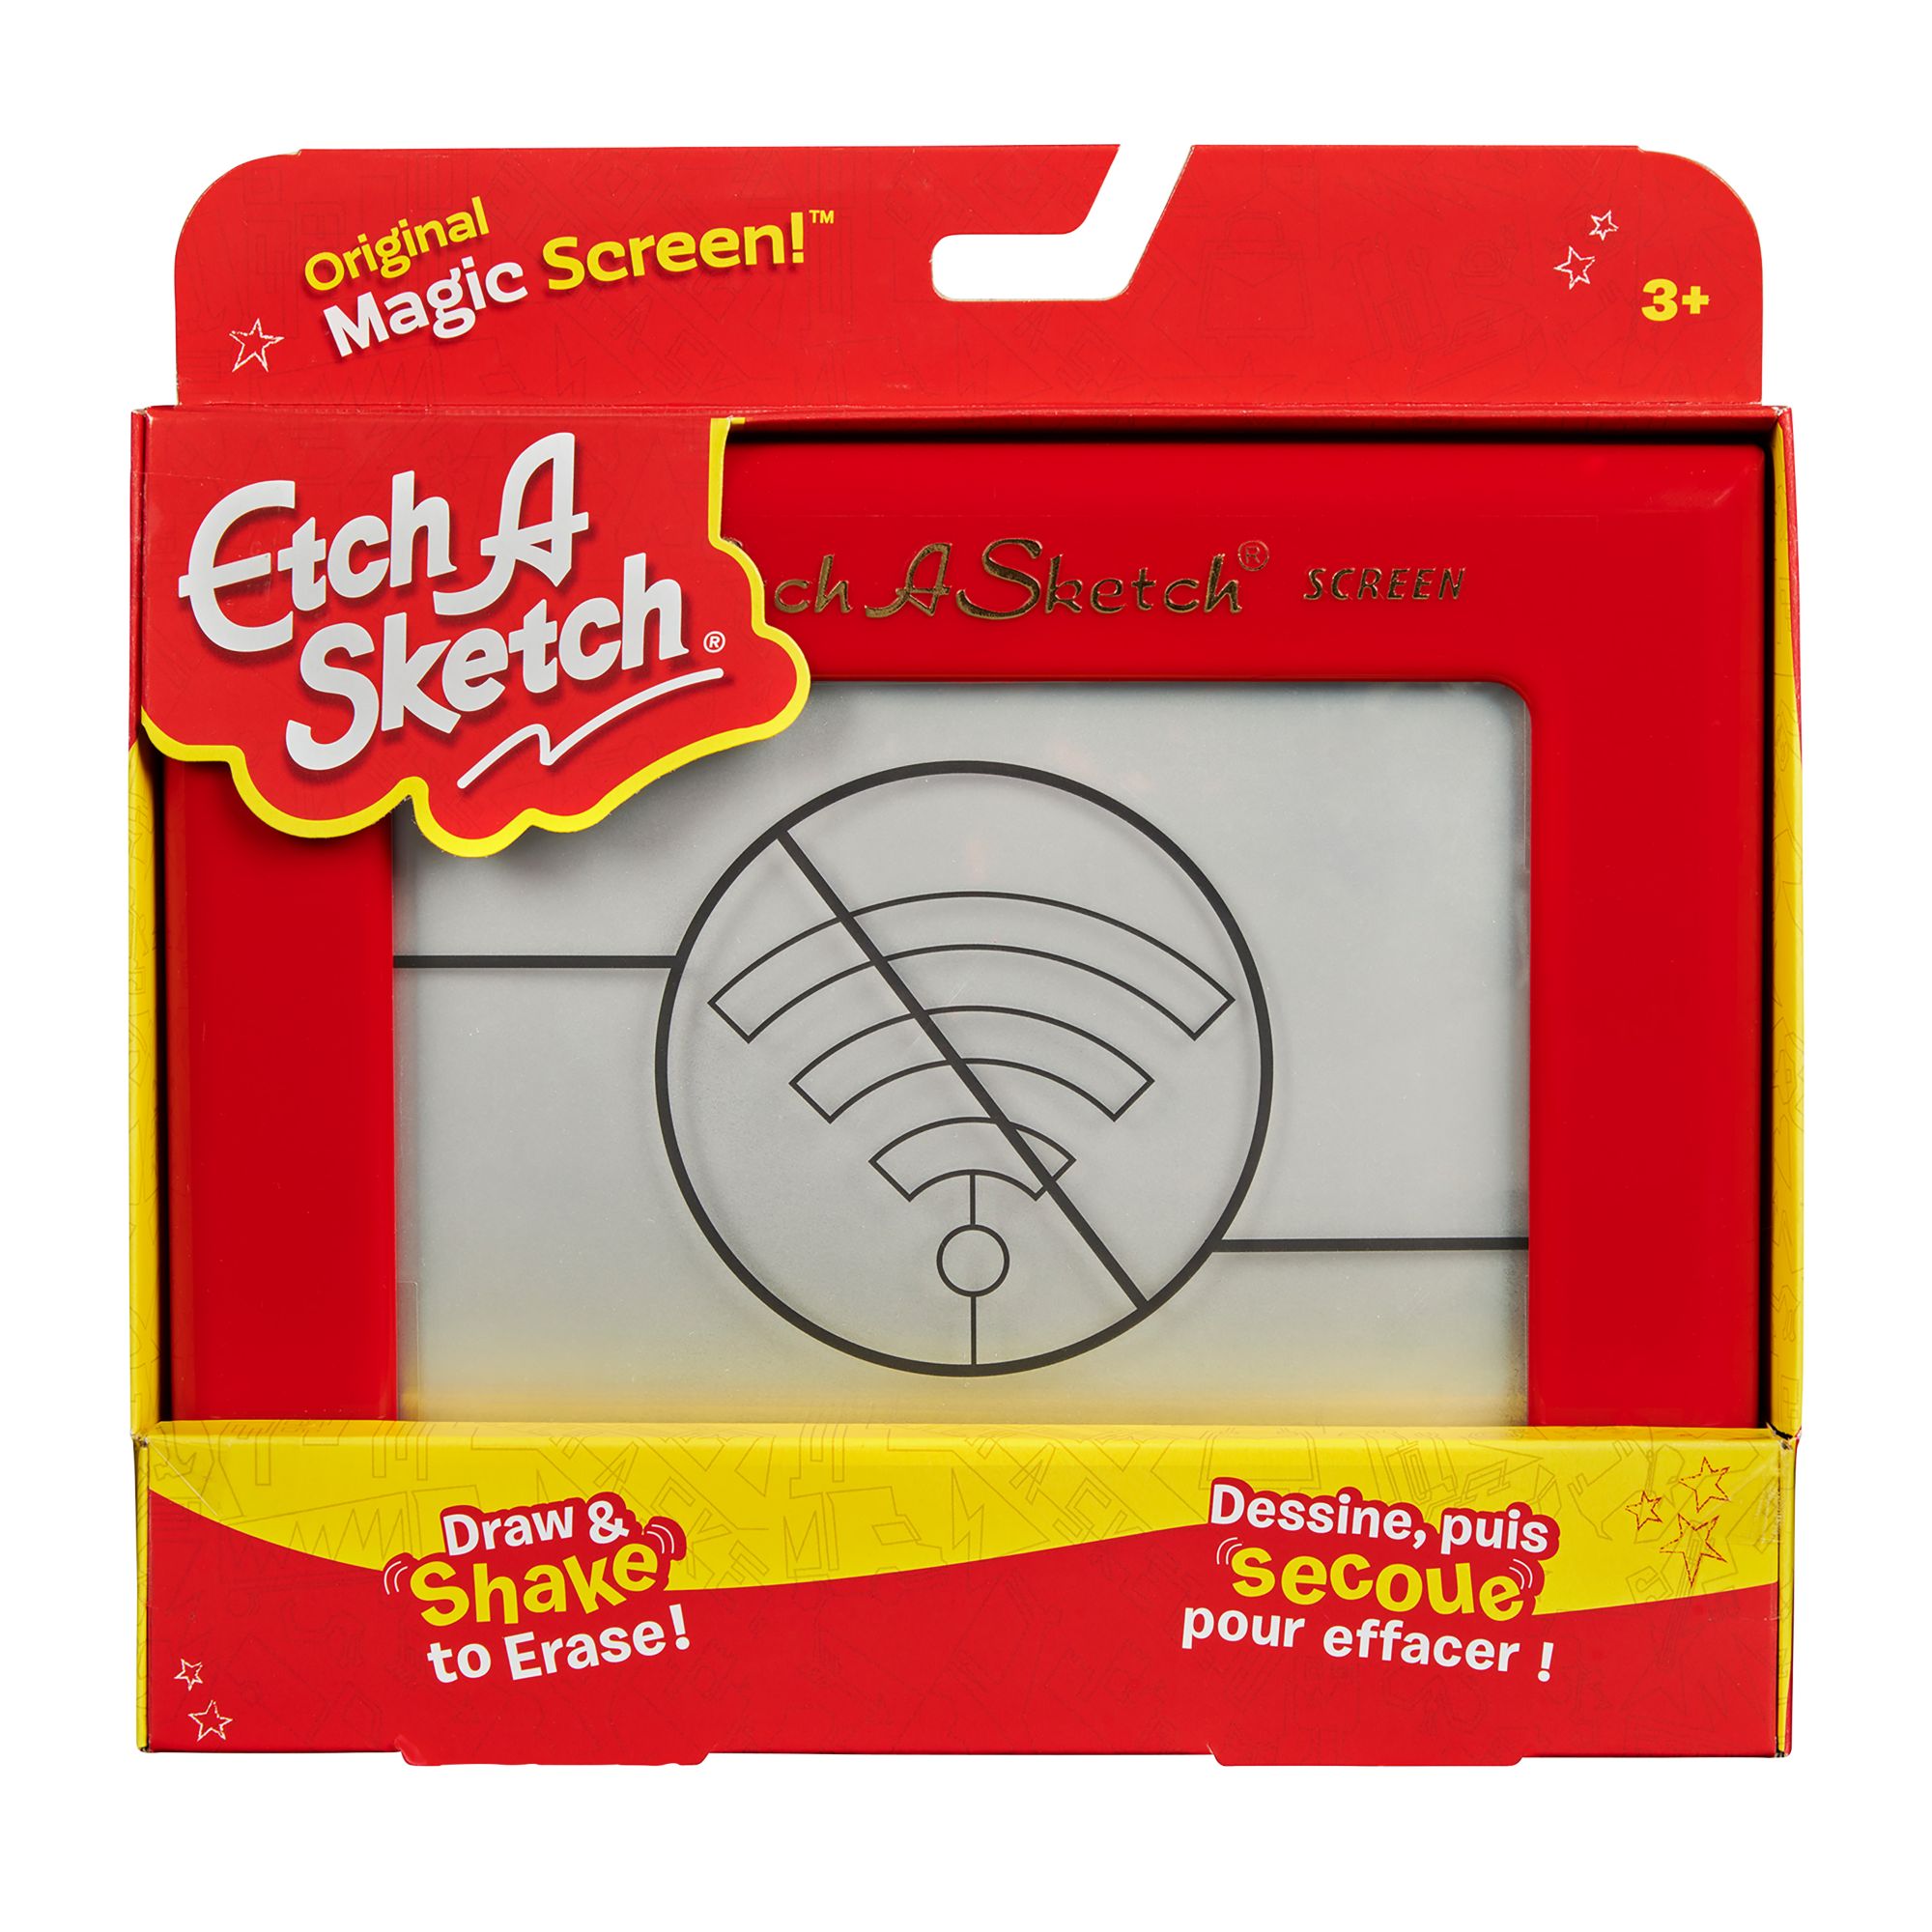 EtchASketch: Funny Get Well Card